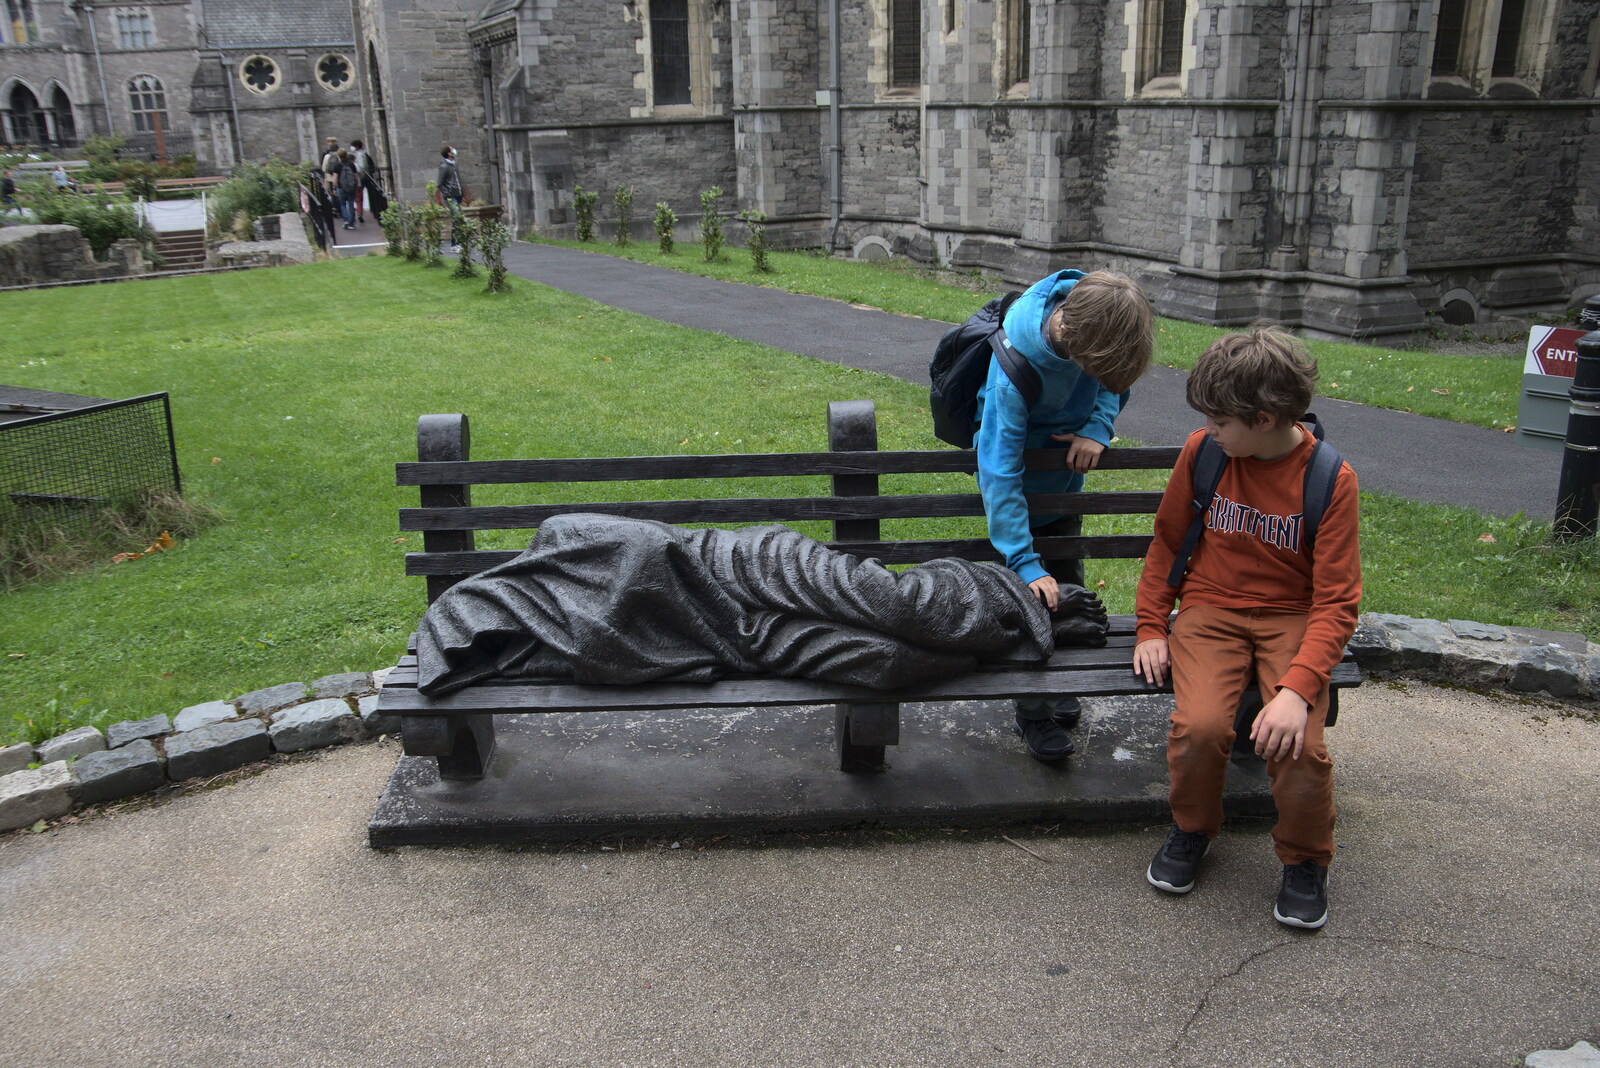 The boys poke a statue on a bench from A Trip to Noddy's, and Dublin City Centre, Wicklow and Dublin, Ireland - 16th August 2021